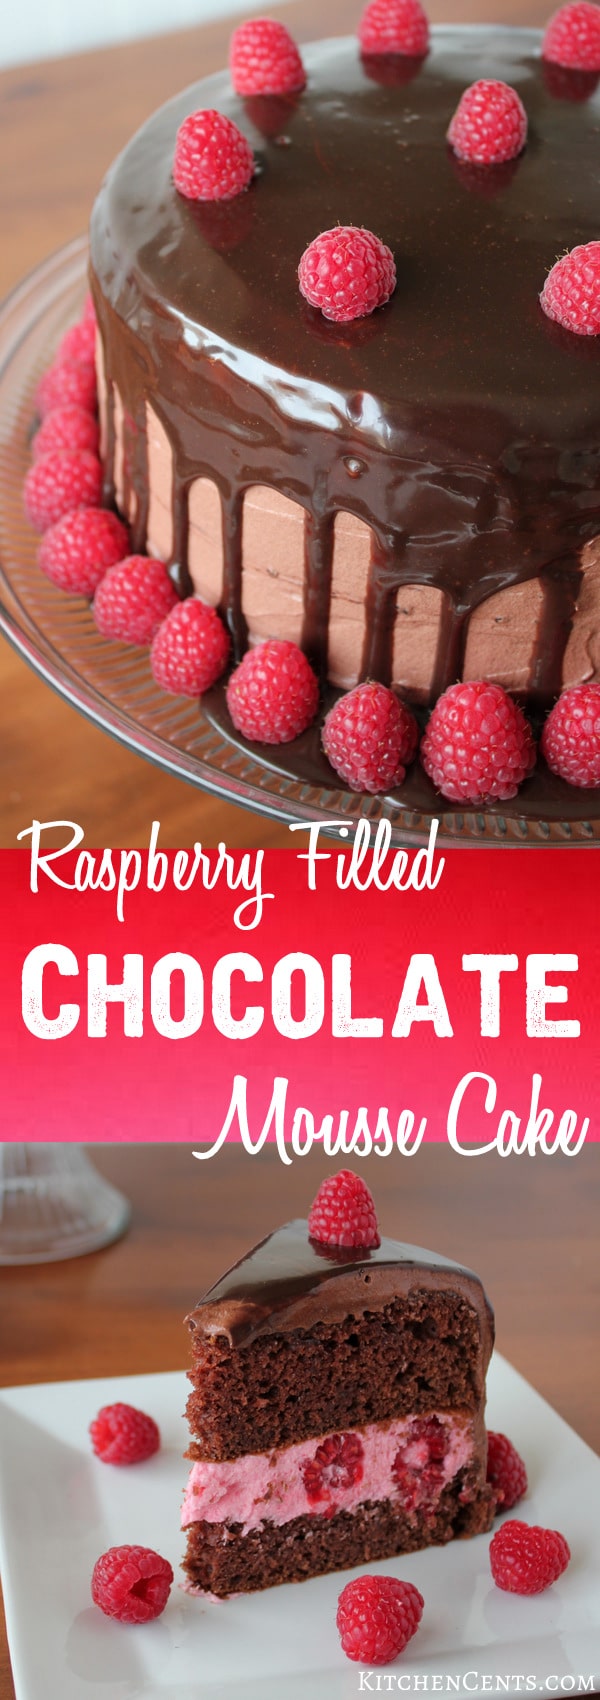 Raspberry Filled Chocolate Mousse Cake | KitchenCents.com